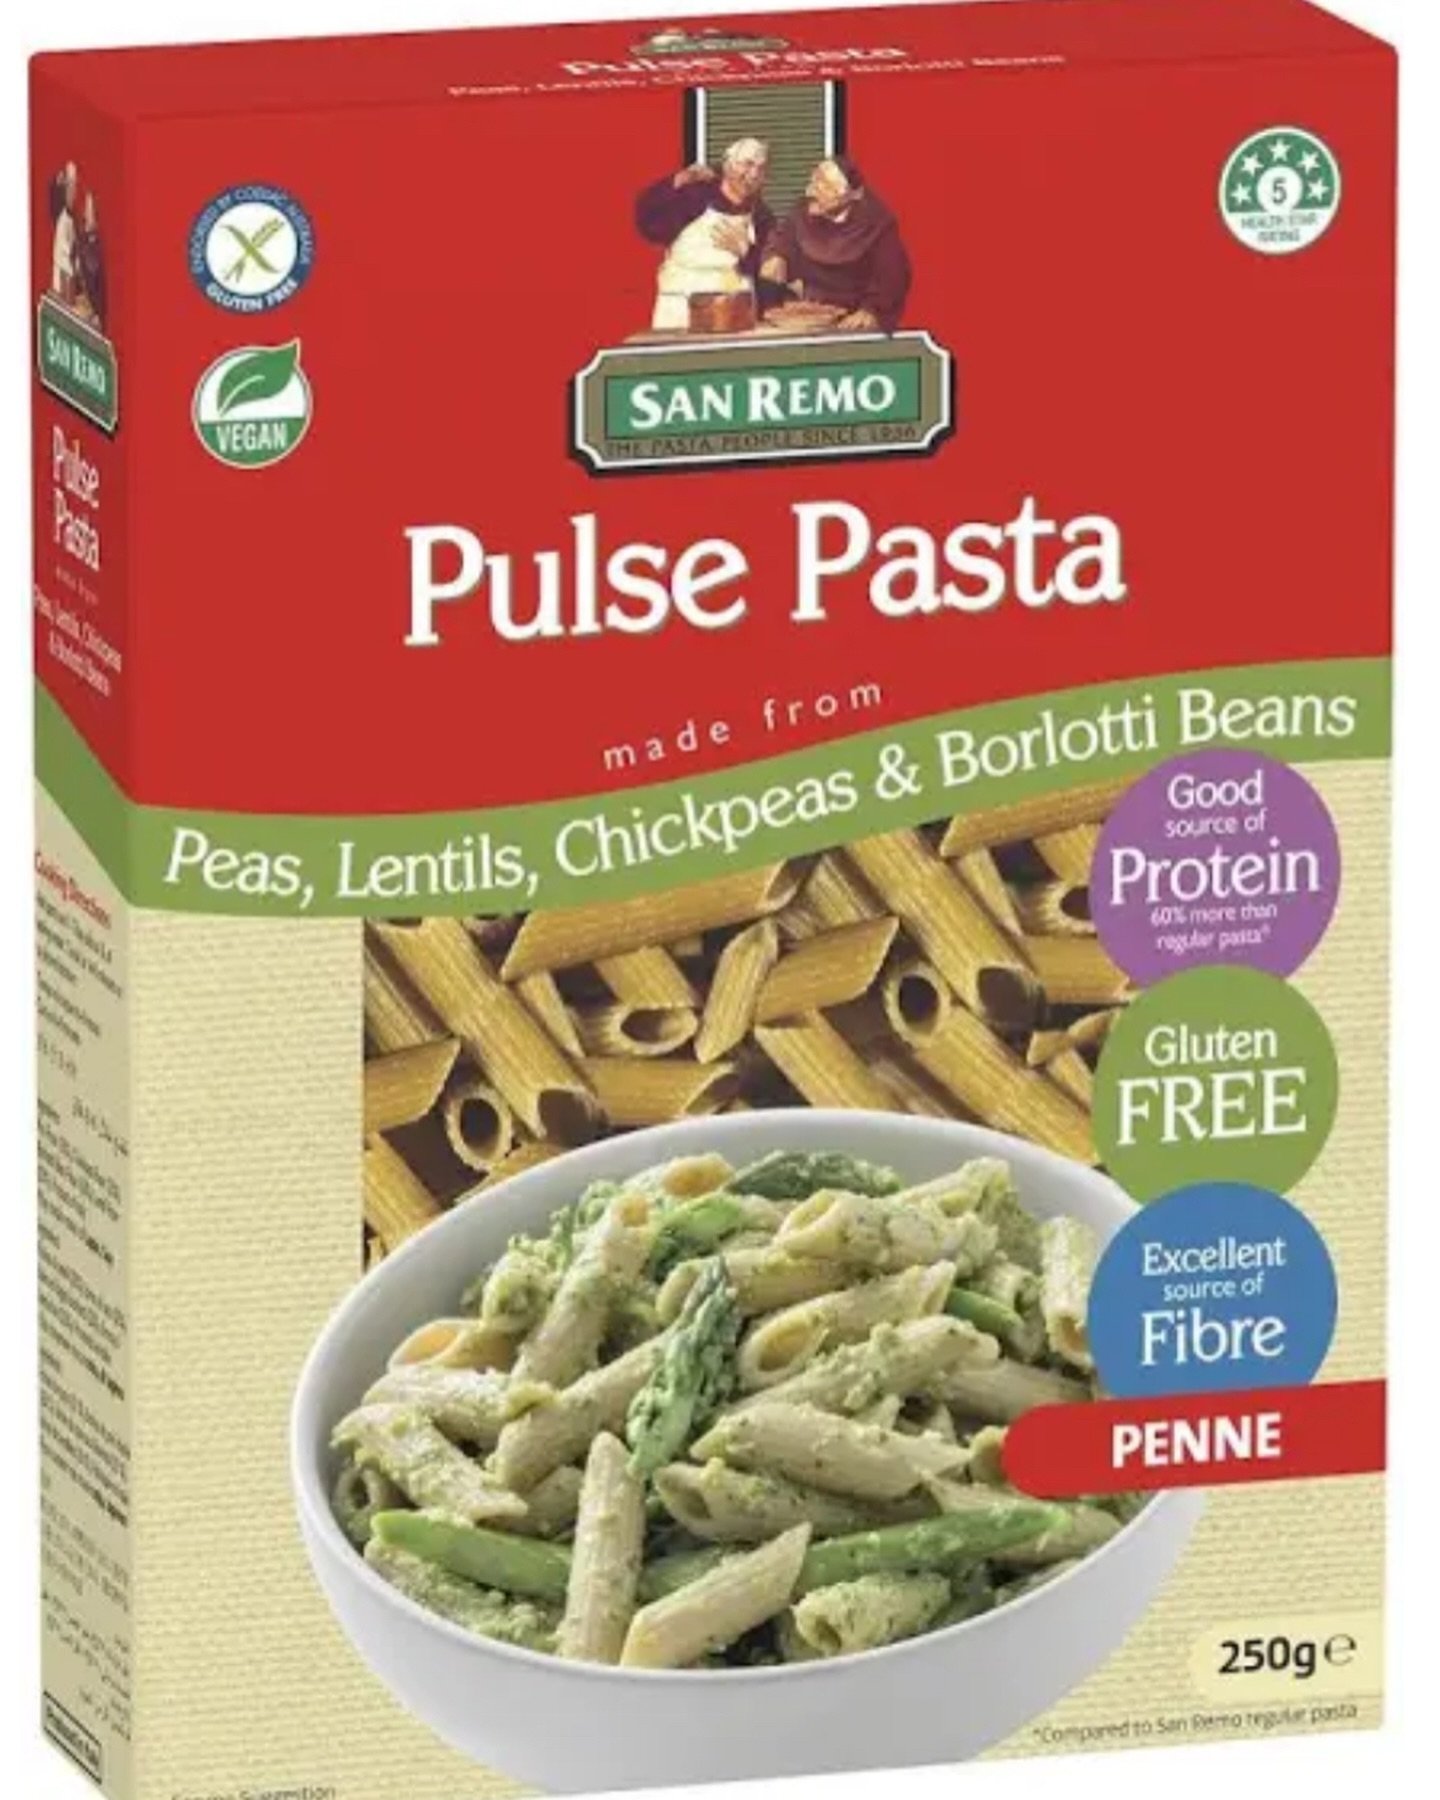 ⭐️ Friday Food Review⭐️

A great way to boost protein and fibre in your child&rsquo;s day. 

✅ contains a variety of plant and legume powders
✅ higher in protein than regular pasta and the types of proteins are good sources of nutrients such as iron 